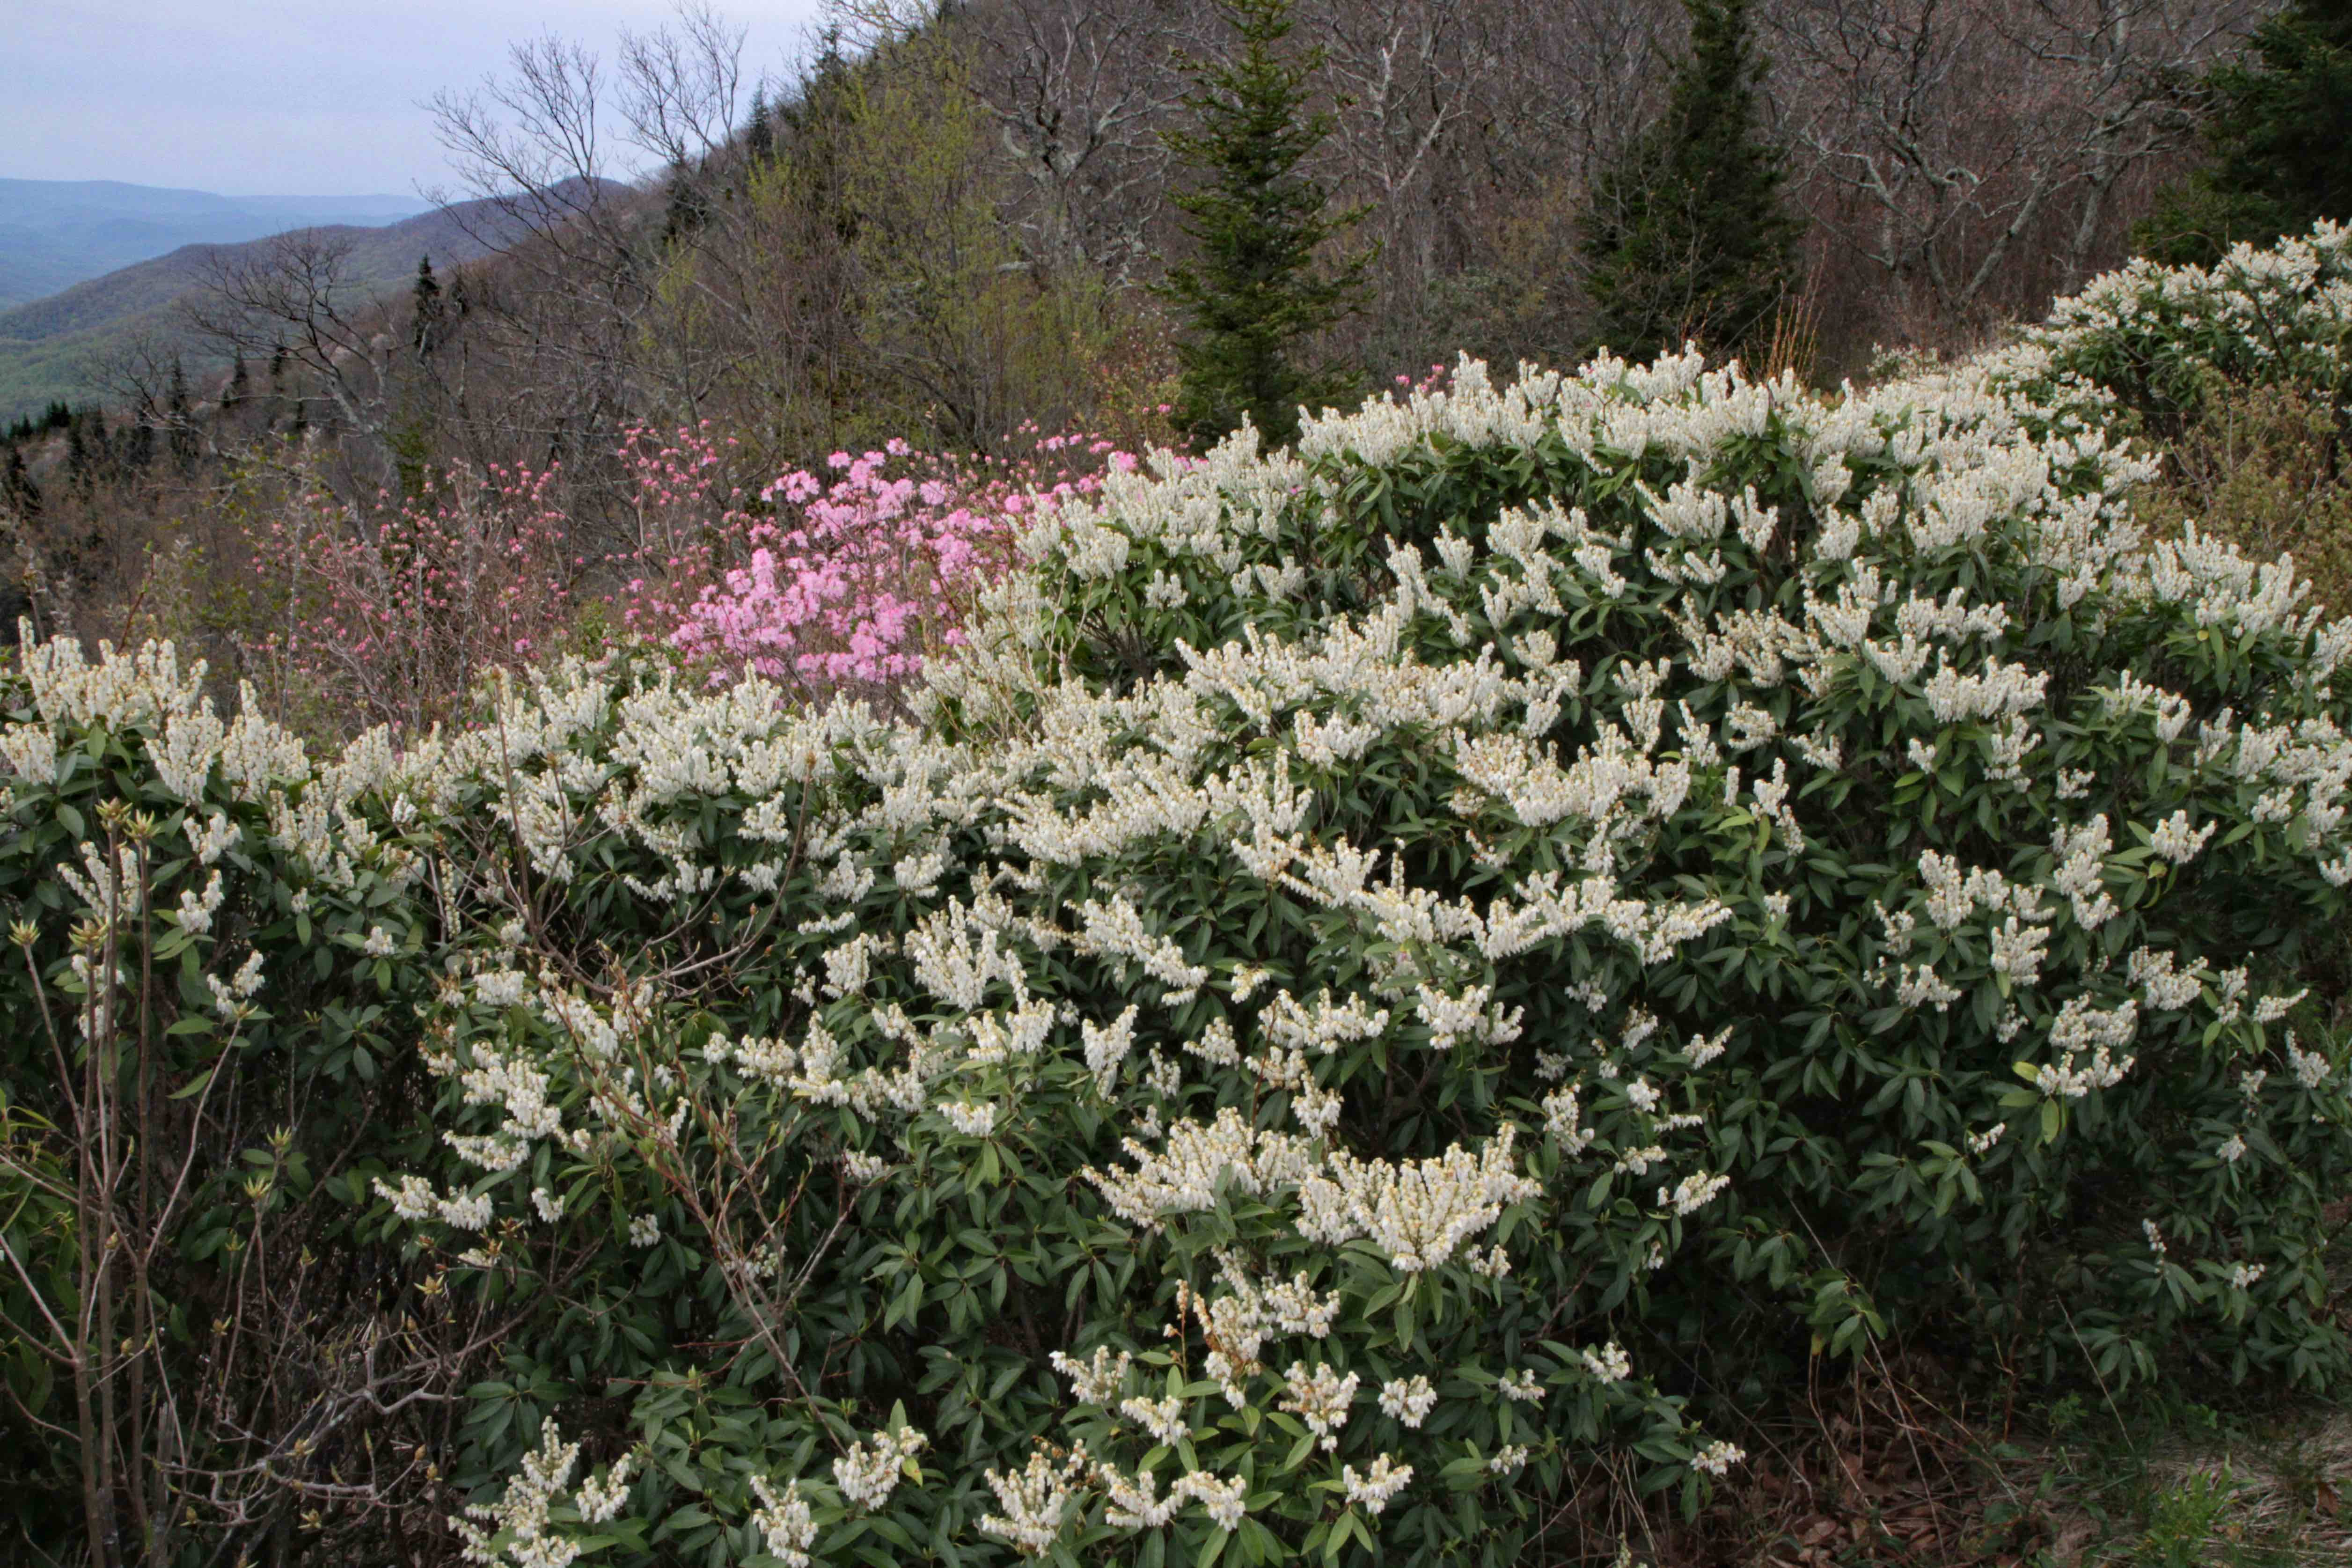 The Scientific Name is Pieris floribunda. You will likely hear them called Mountain Andromeda, Evergreen Mountain Fetterbush. This picture shows the Pieris floribunda and Rhododendron vaseyii blossom before the trees leaf out in mid-May in the Pisgah National Forest at 5,000 foot elevations. of Pieris floribunda